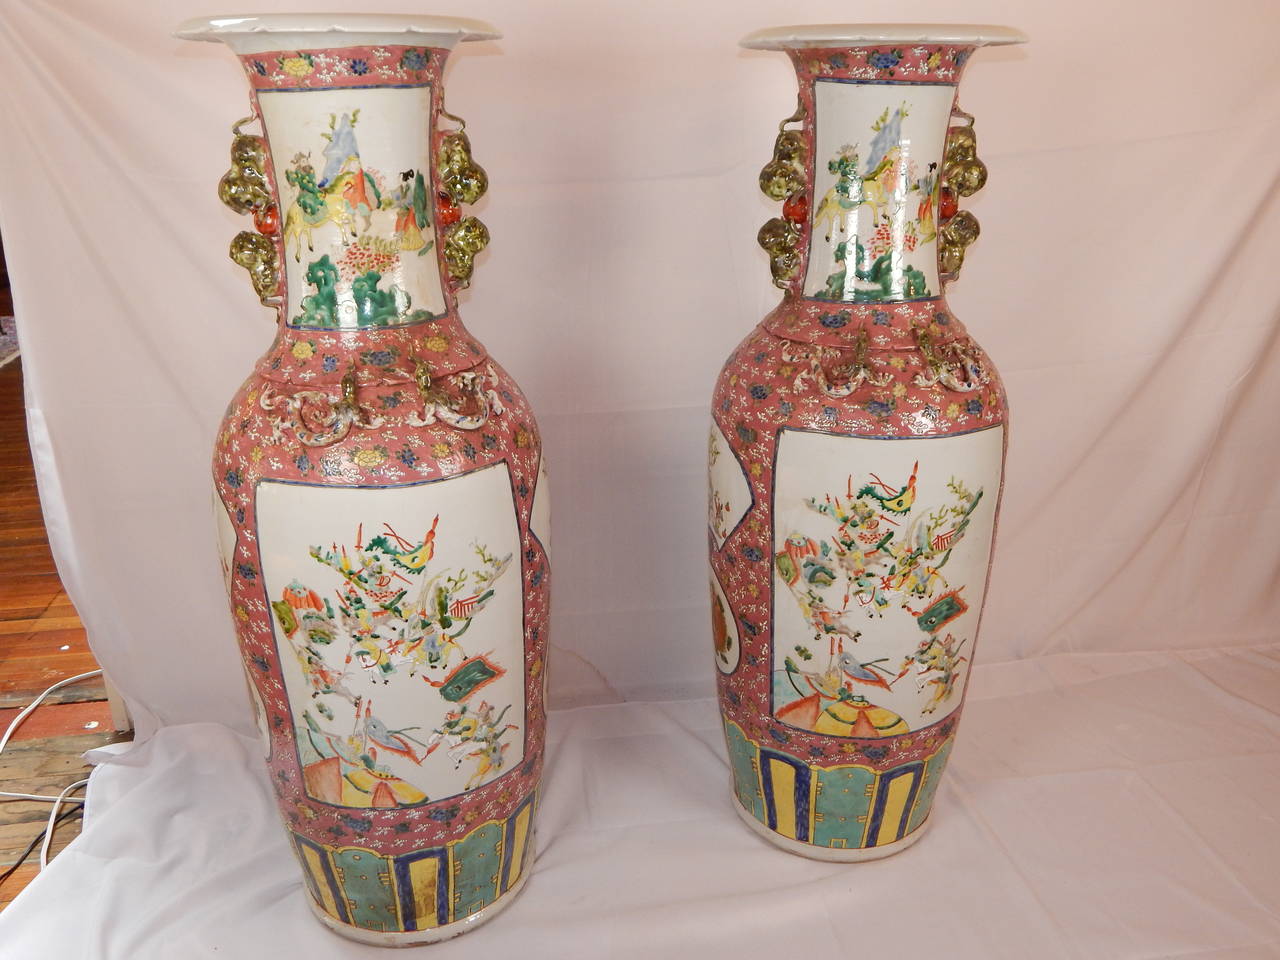 A beautifully hand painted enamel pair of Chinese palace vases, with scenes on front and back, on a pink ground, along with Foo lion handles and lizards.